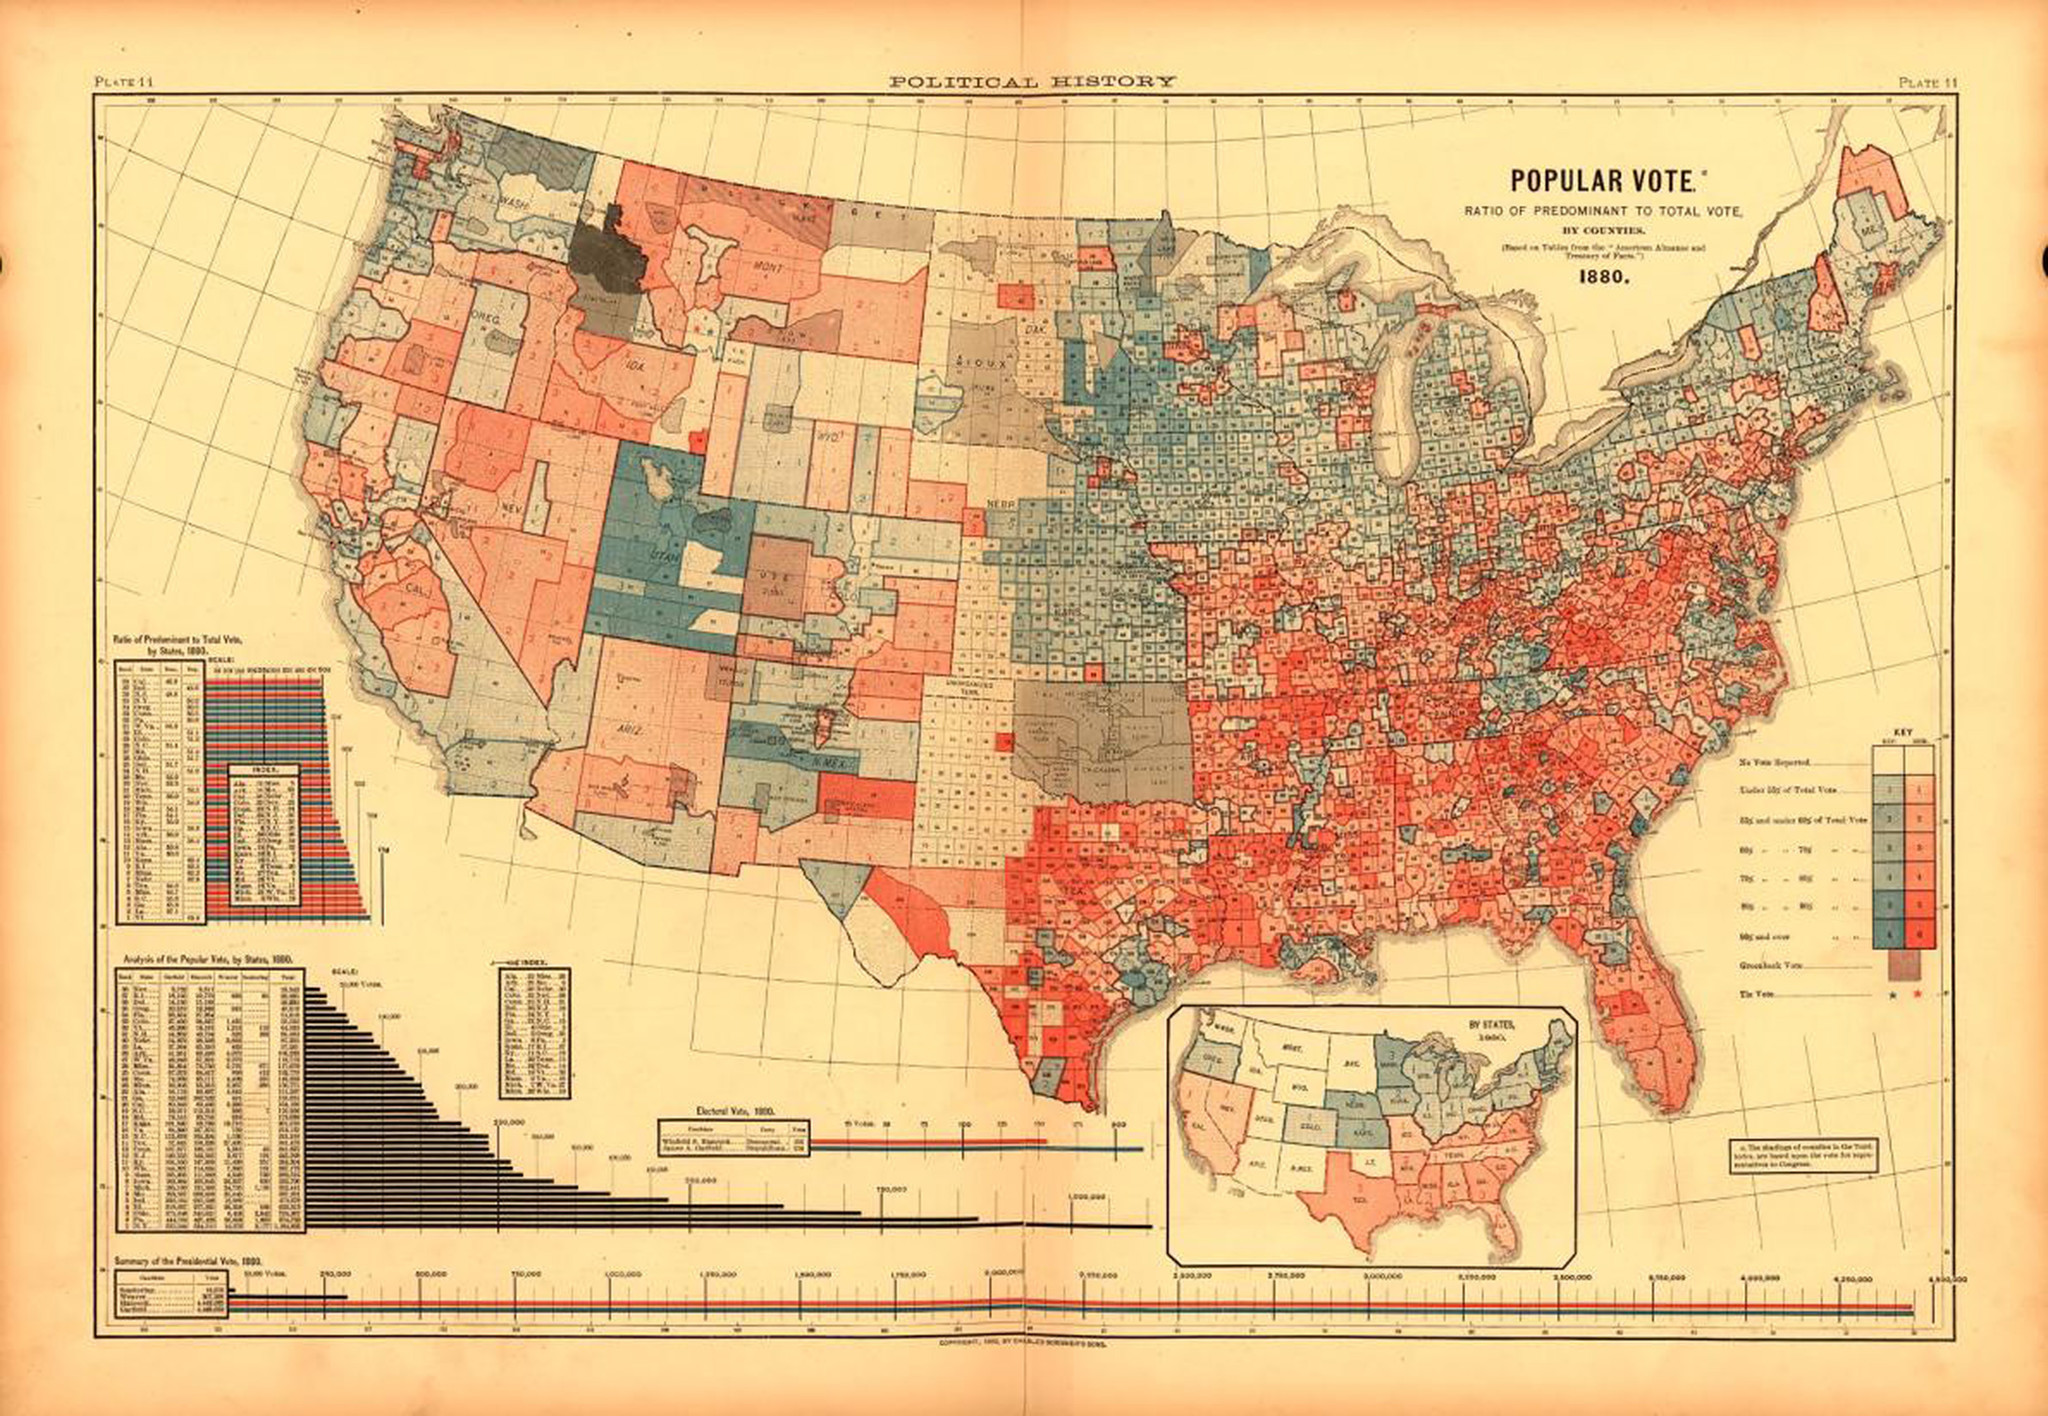 The popular vote of 1880's presidential election, as seen on the oldest-known U.S. electoral map. Published in 1883 by U.S. Census Bureau, red represented Democrats and blue was for Republicans.